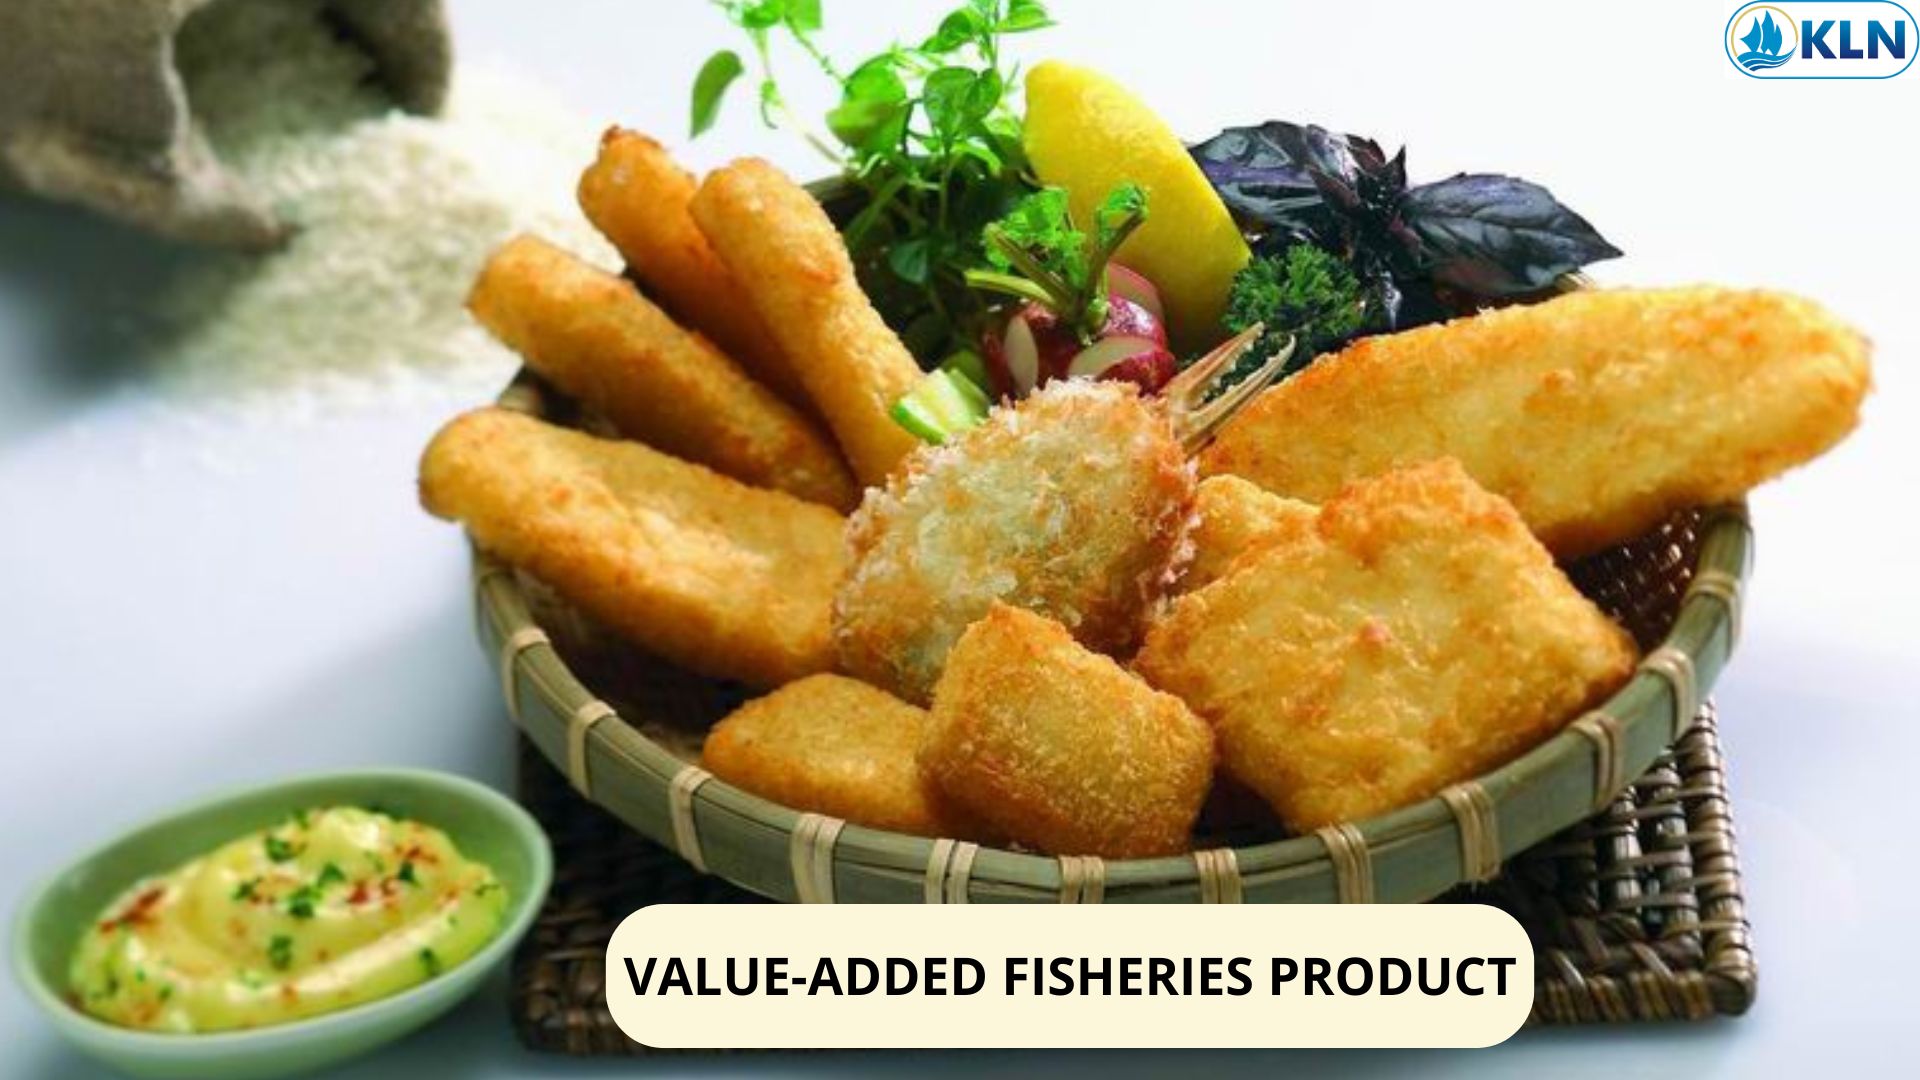 VALUE-ADDED FISHERIES PRODUCT